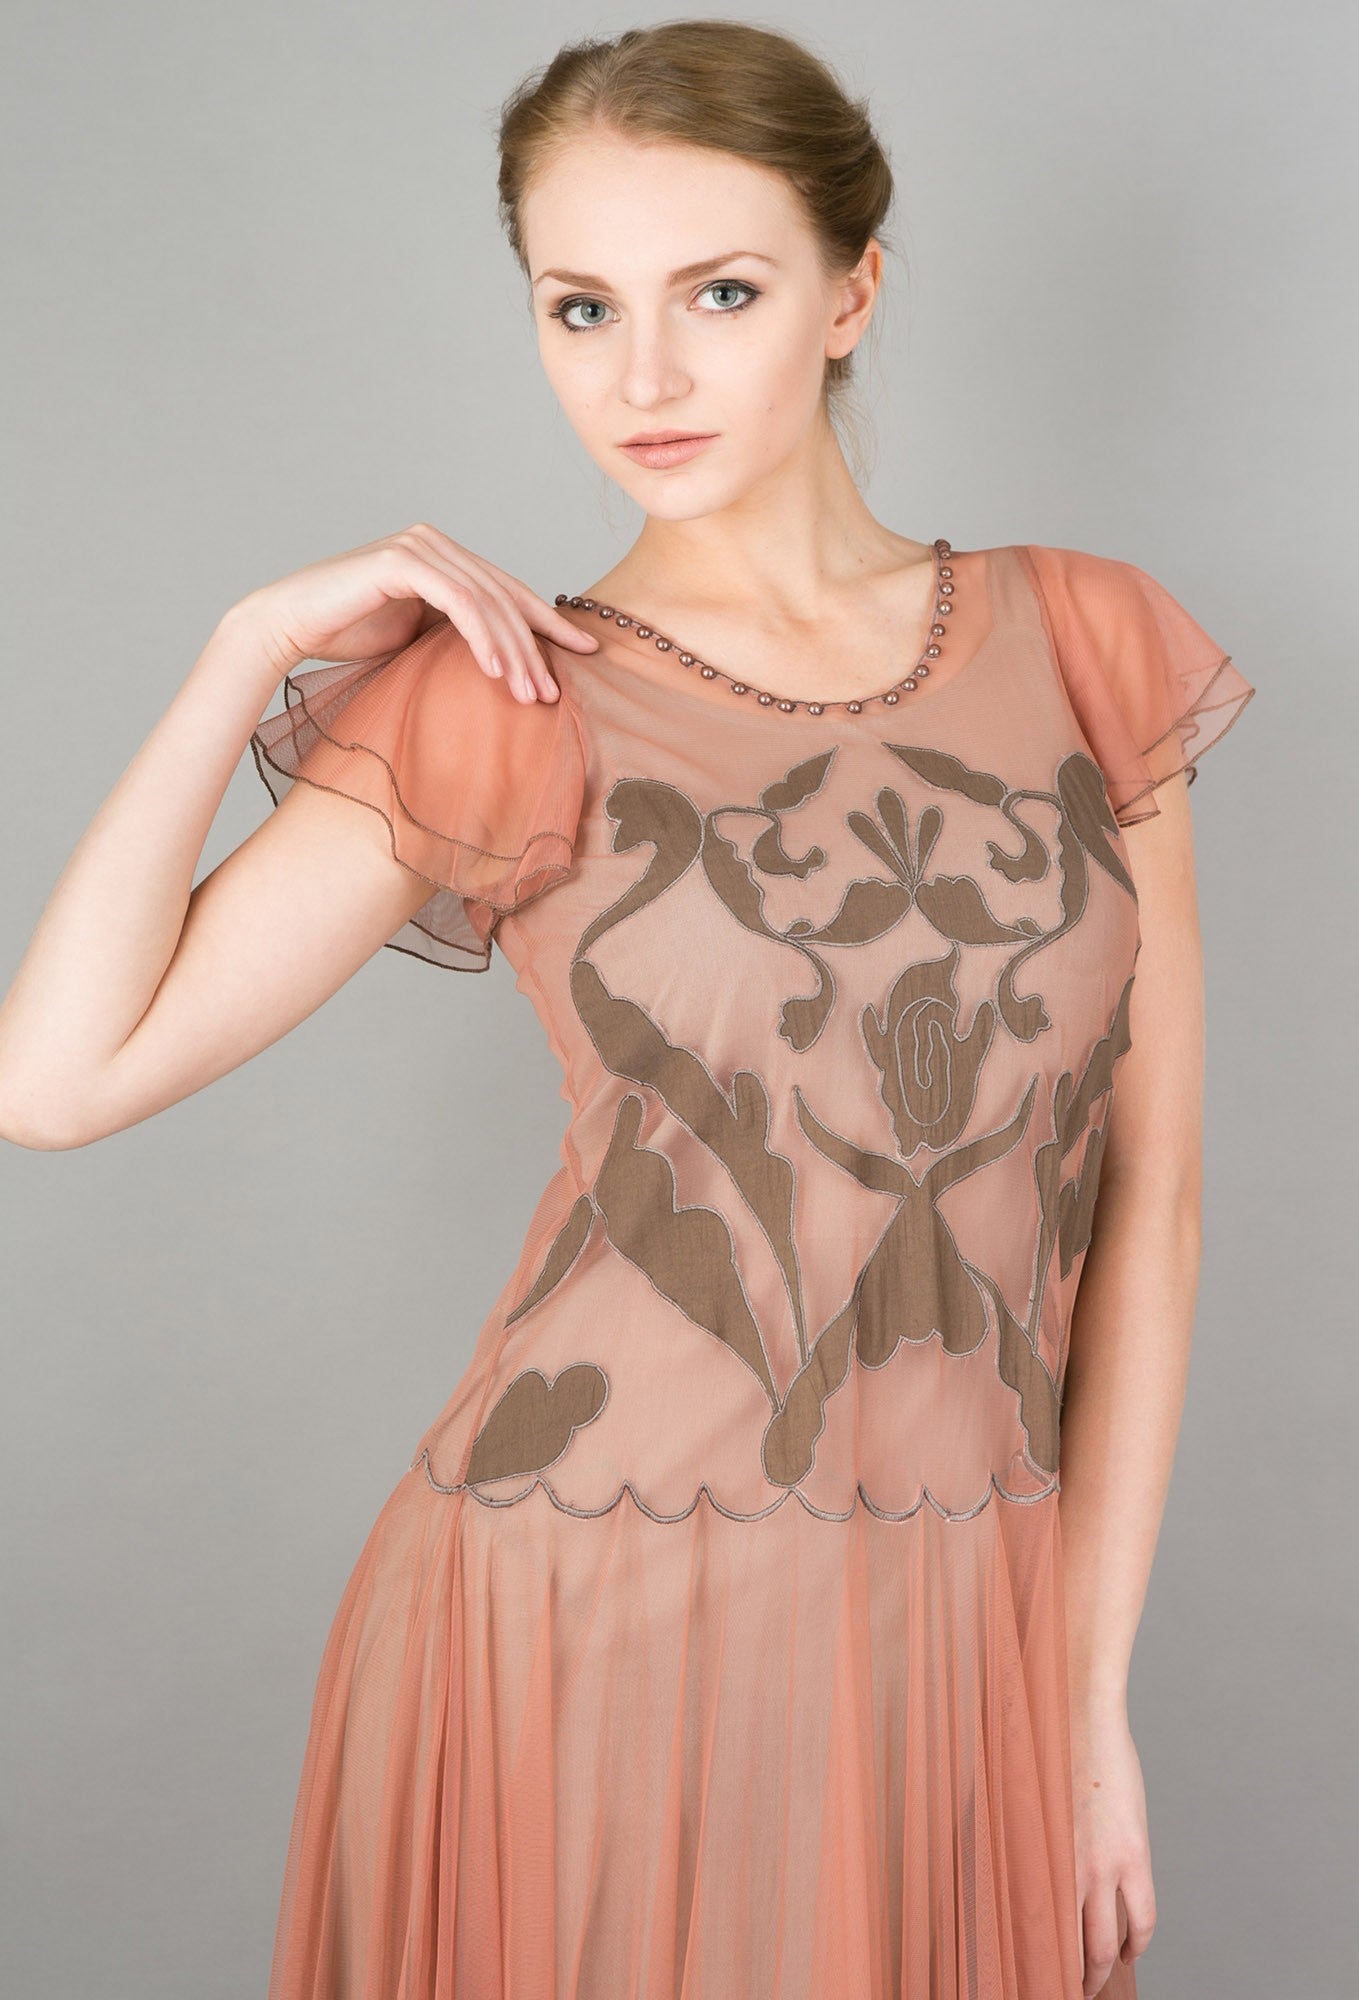 Downton Abbey Romantic Vienna Party Dress in Rose-Silver by Nataya - SOLD OUT